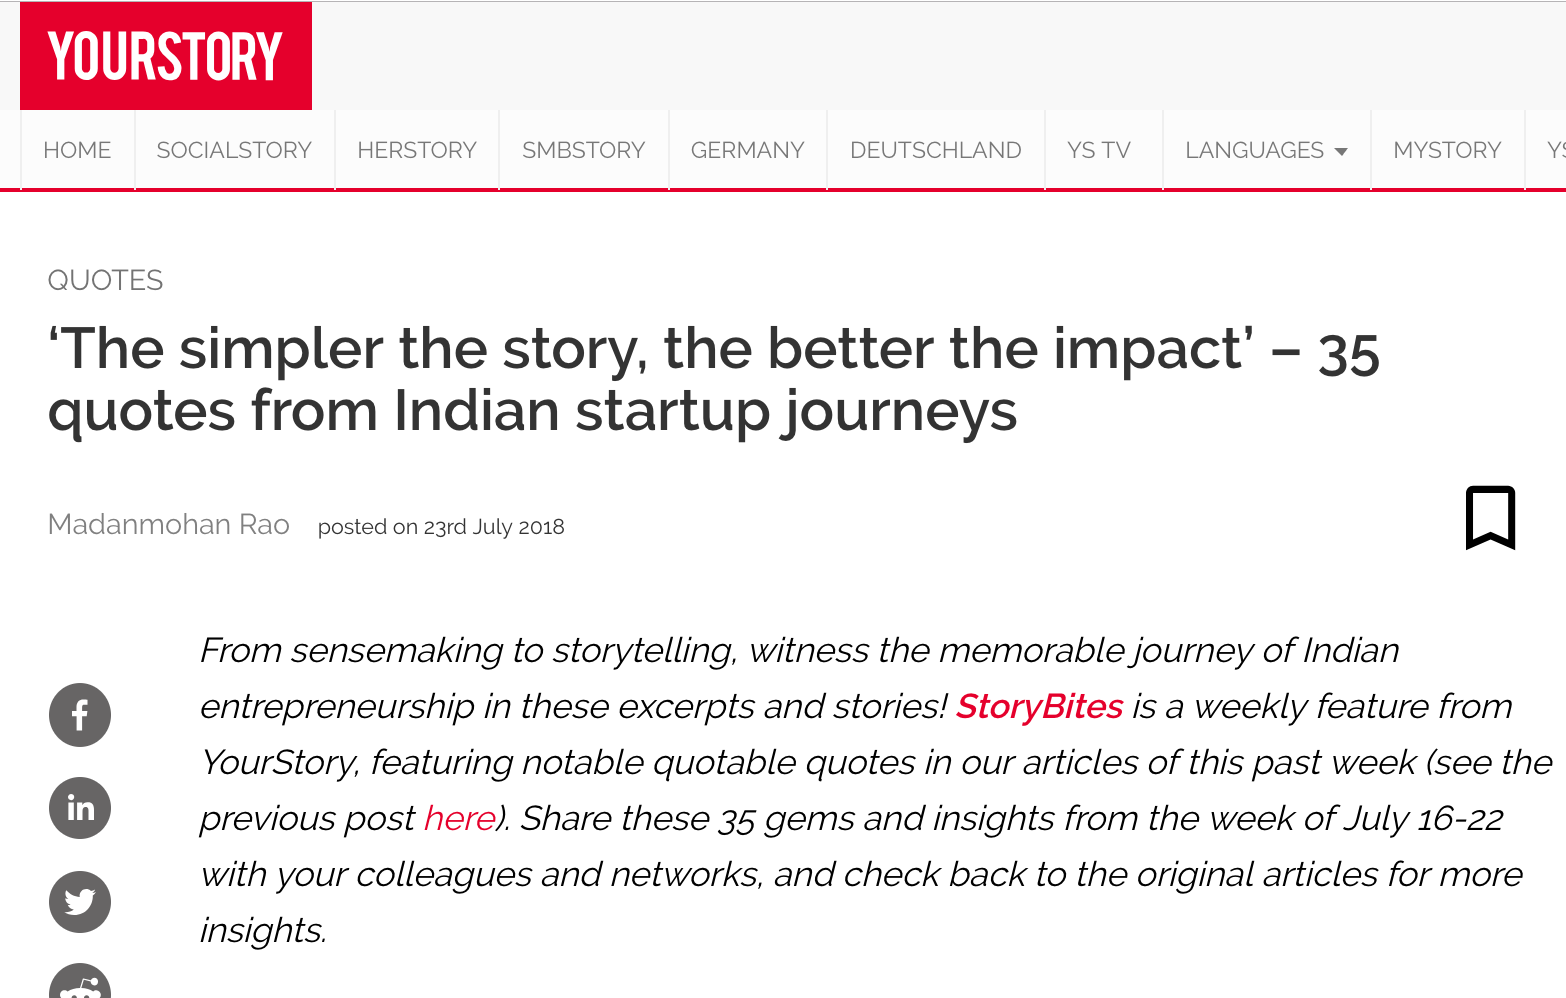 YourStory | ‘The simpler the story, the better the impact’ – 35 quotes from Indian startup journeys